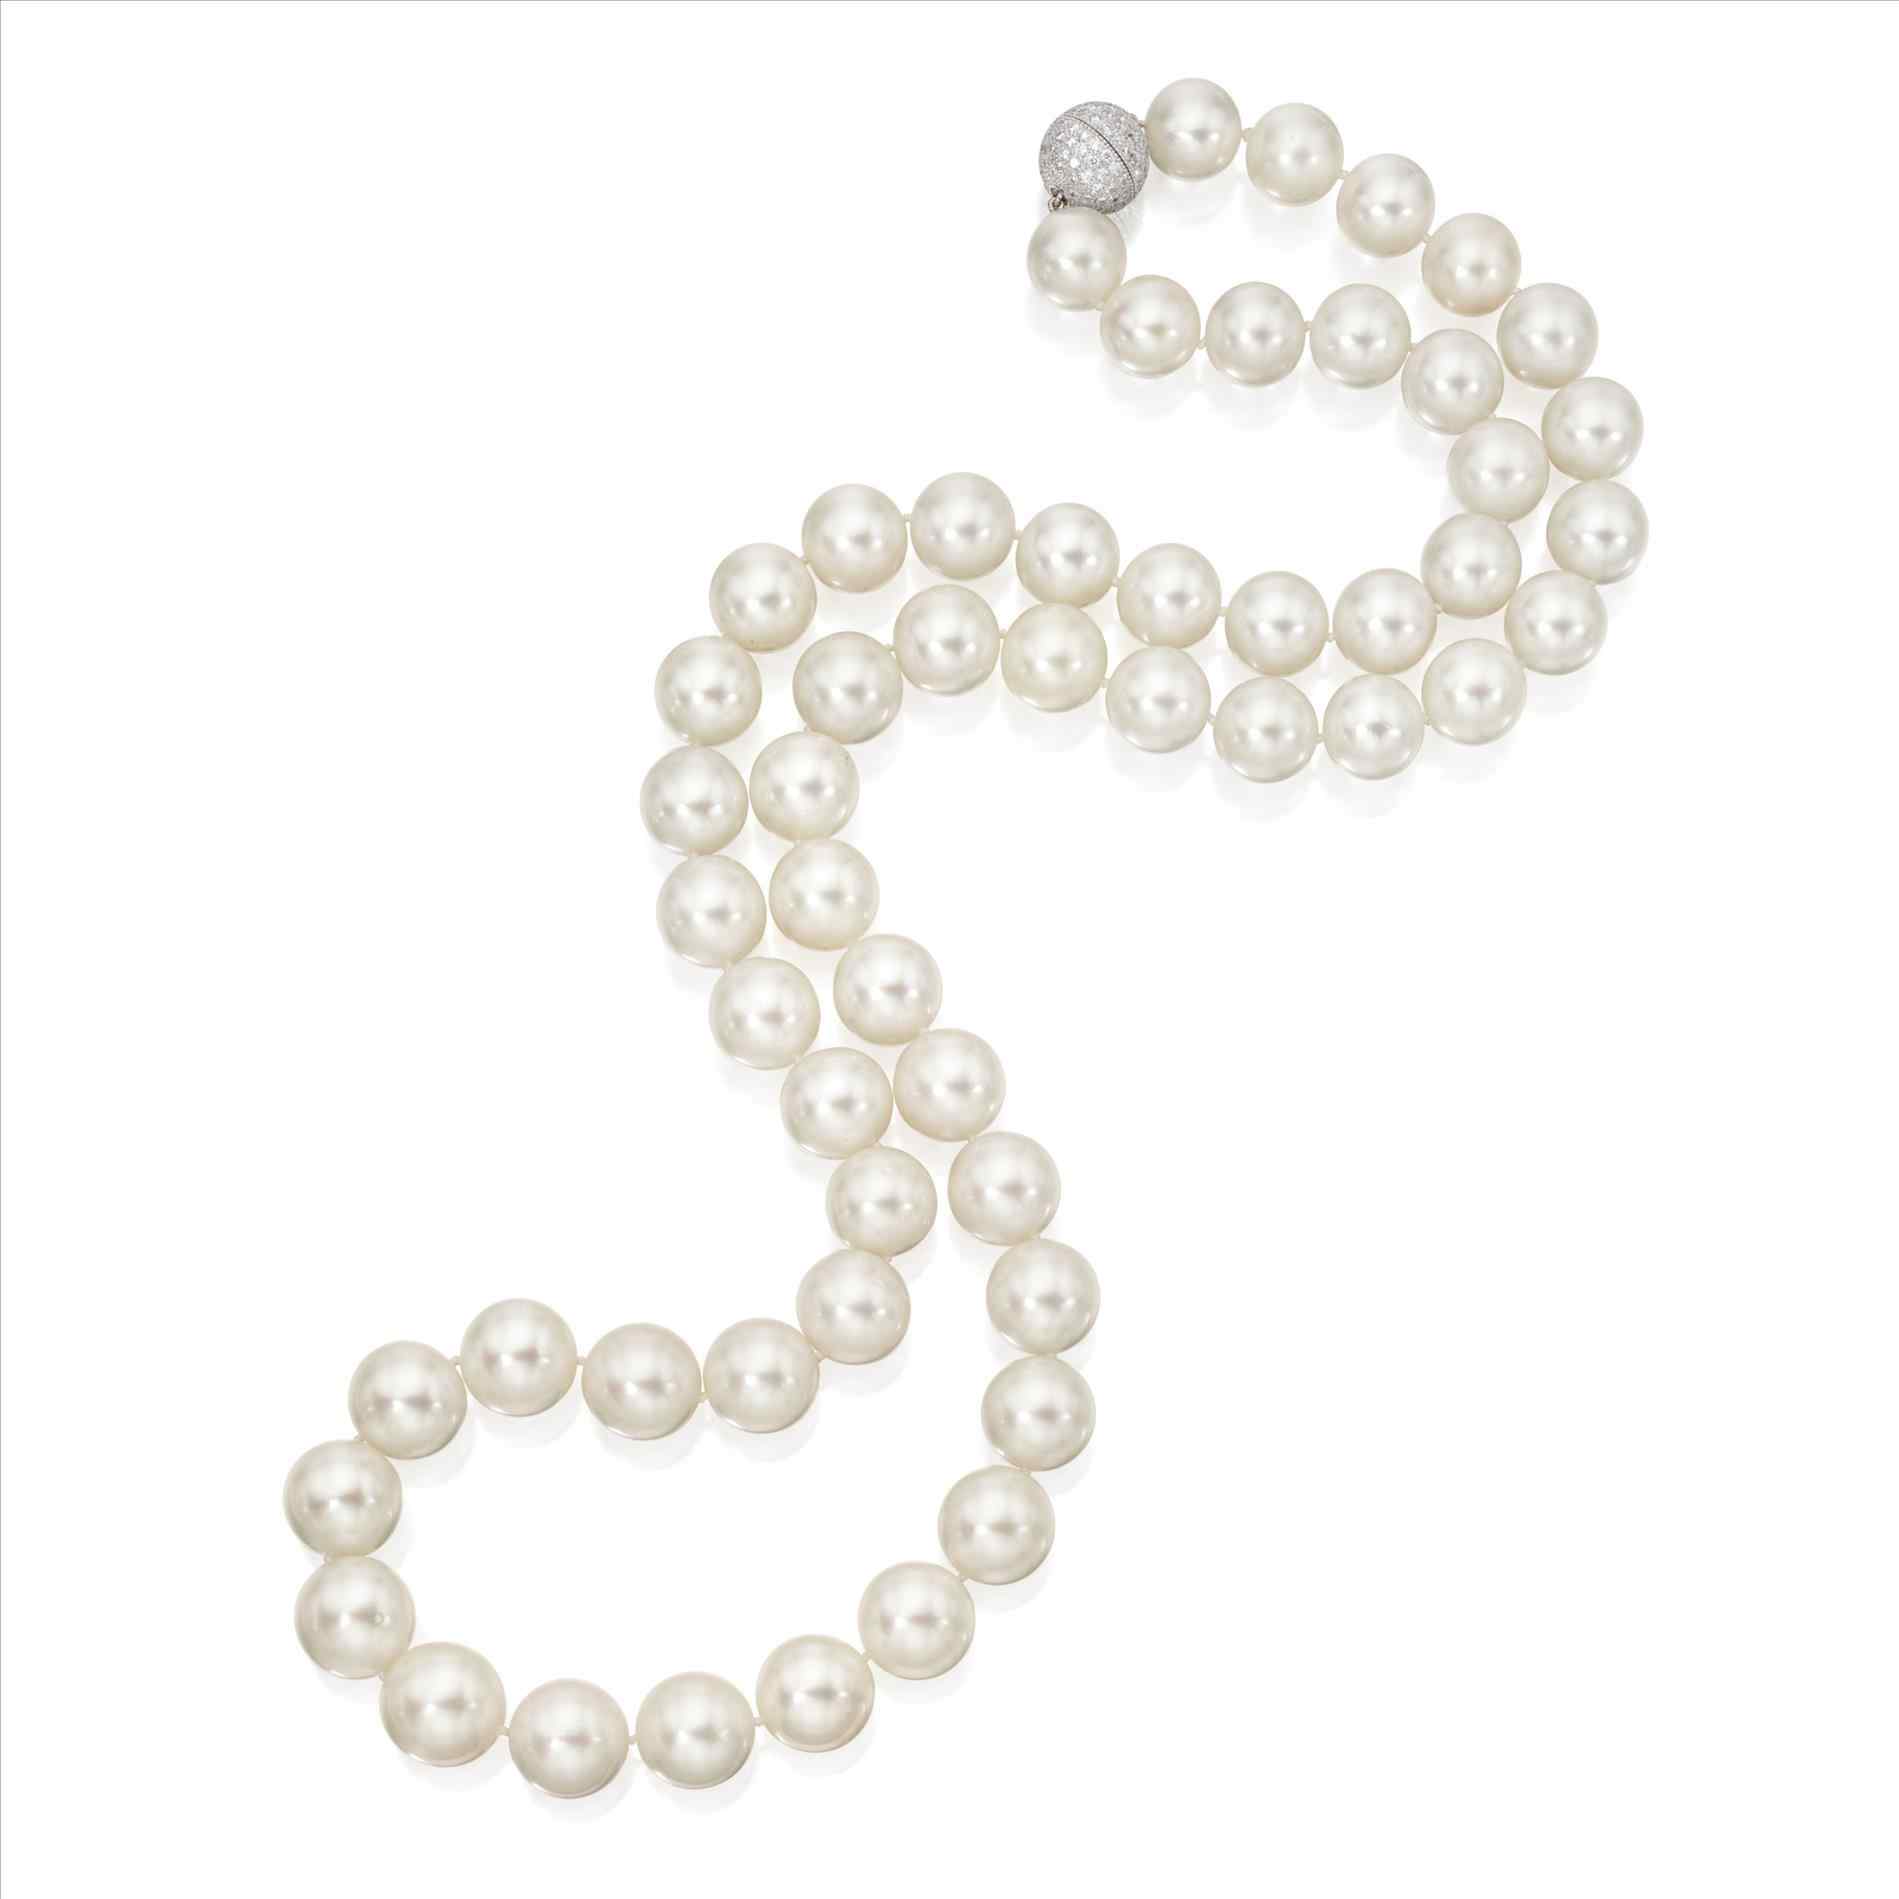 Nice String Of Pearls Png Pictures Inspiration - Jewelry Collection ., String Of Beads PNG - Free PNG